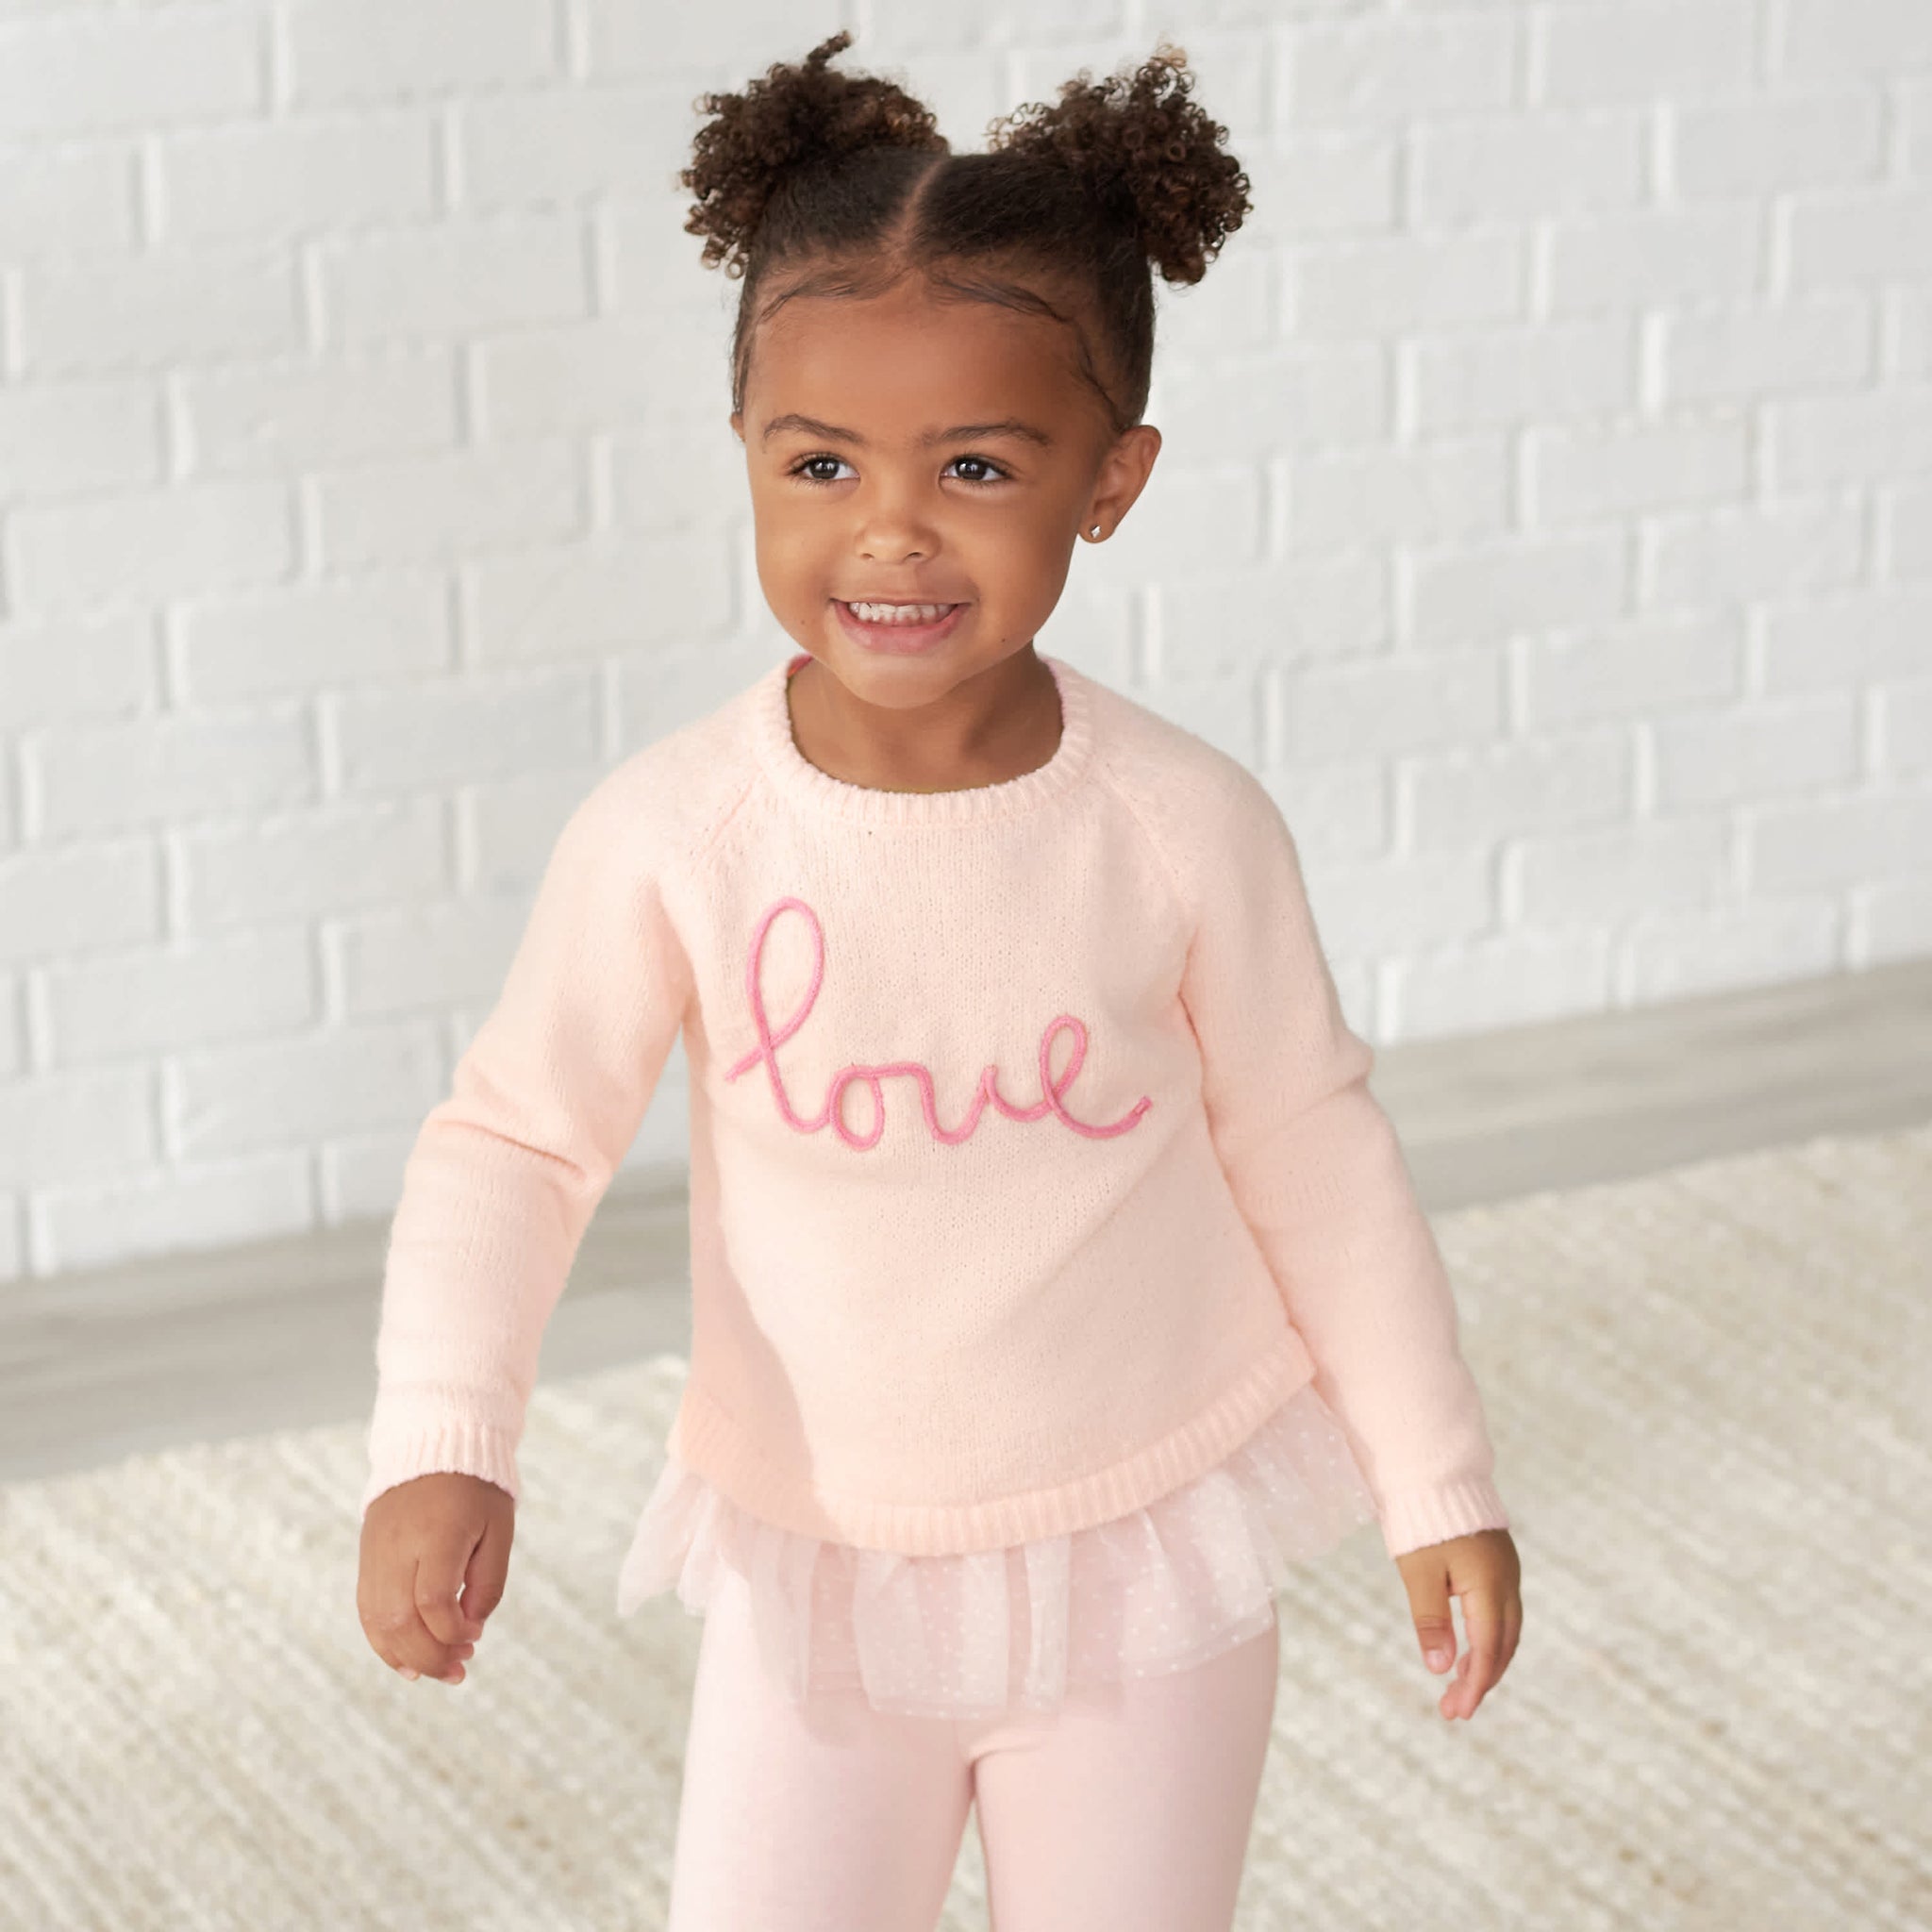 Infant & Toddler Girls Light Pink Sweater With Tulle Trim-Gerber Childrenswear Wholesale